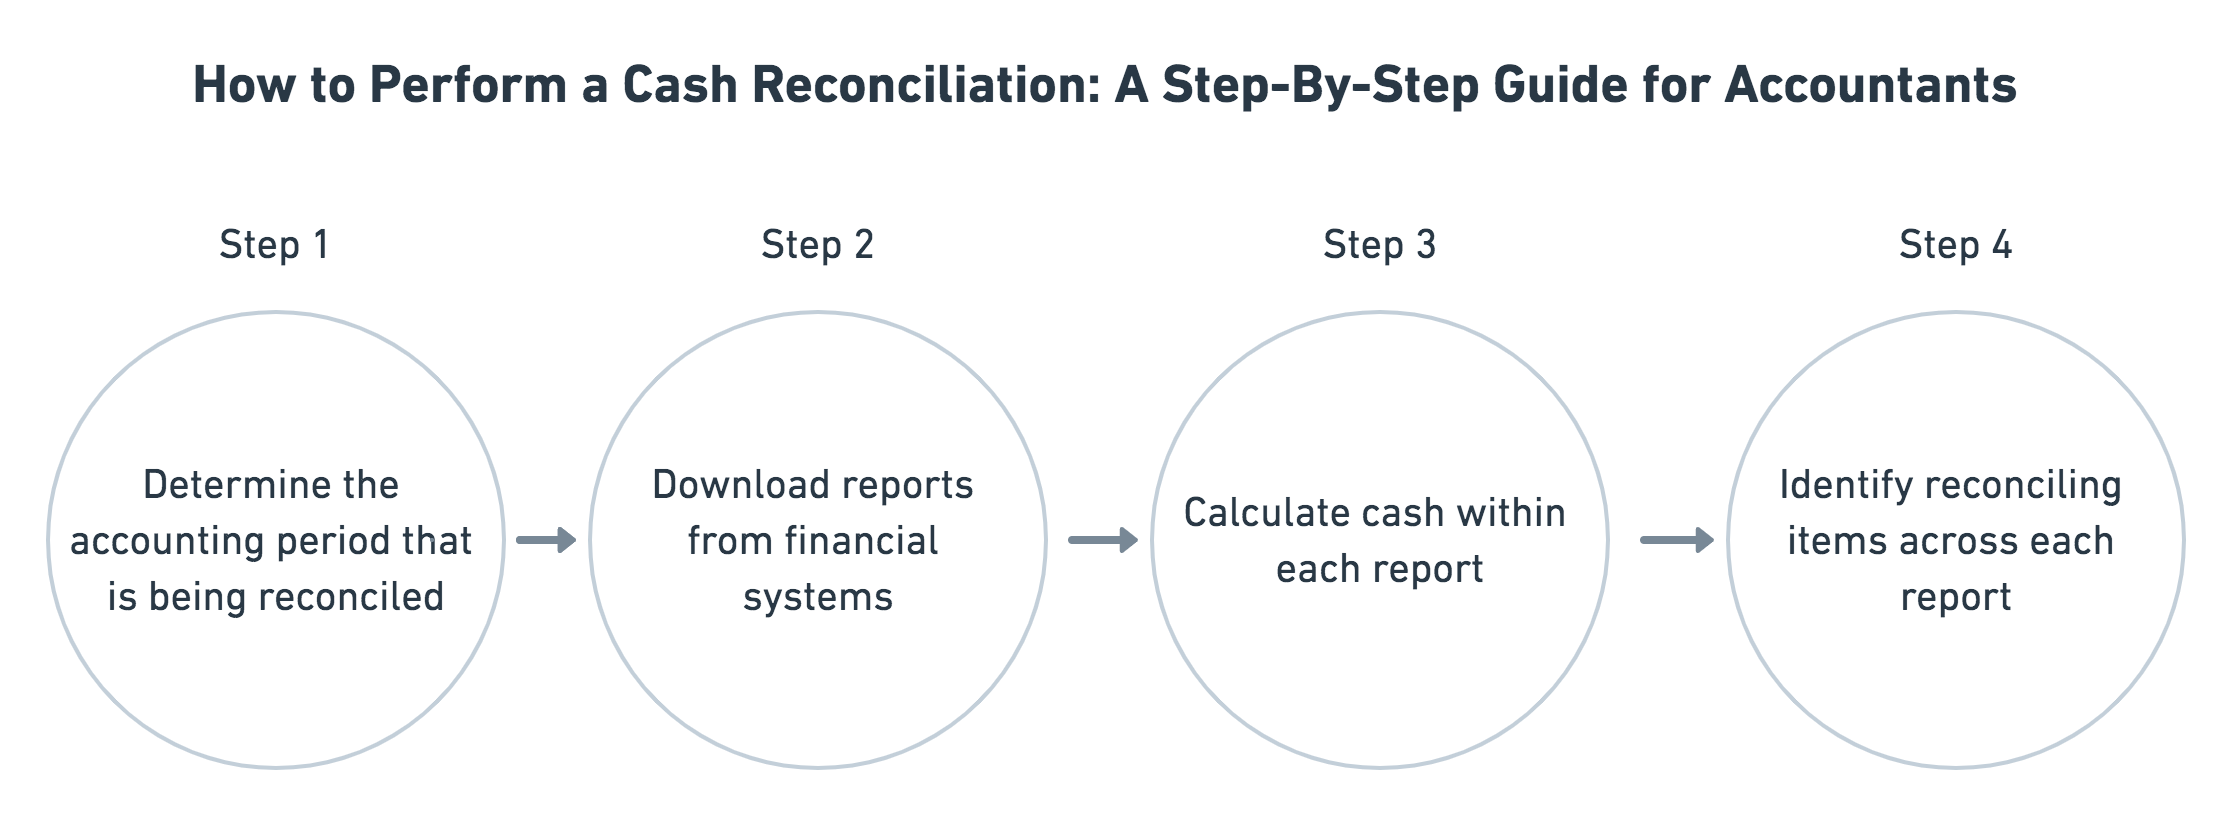 How-to-perform-a-cash-reconciliation-a-step-by-step-guide-for-accountants